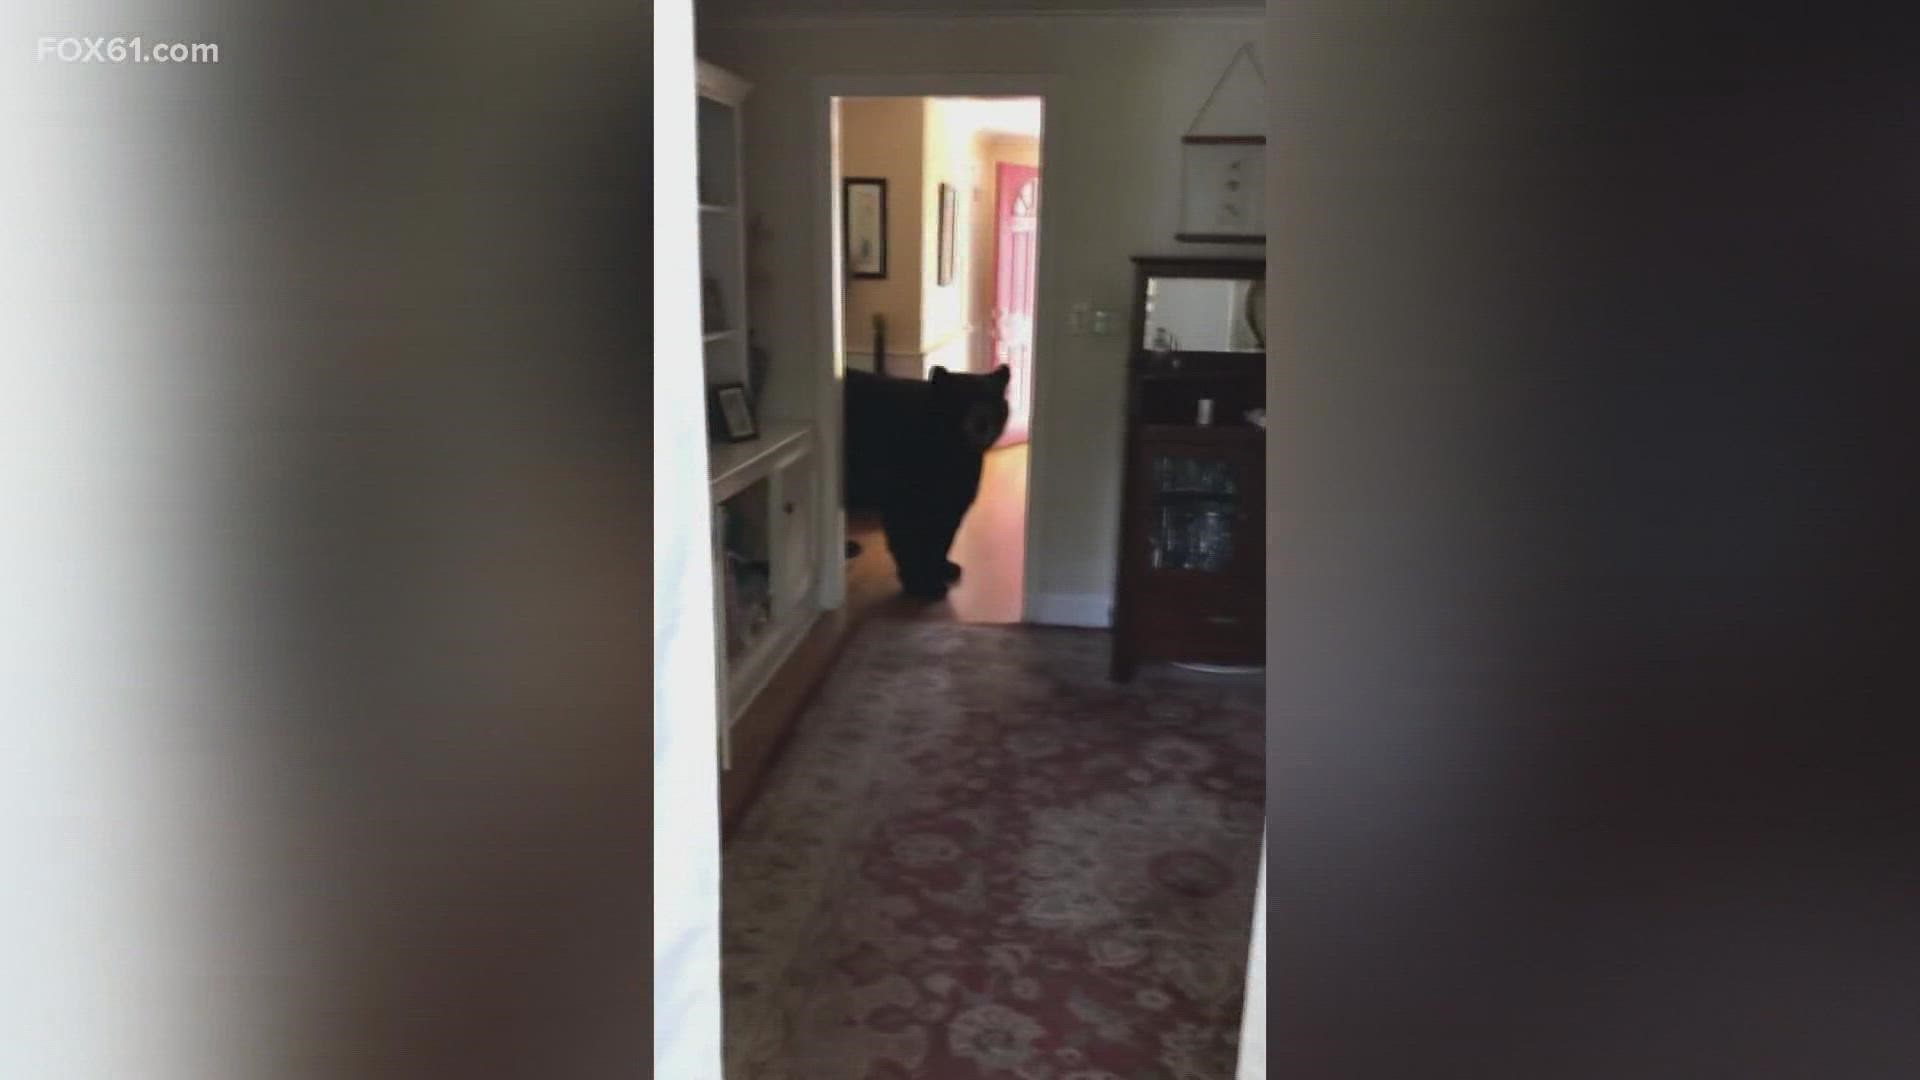 A large bear broke into a West Hartford home Sunday and the homeowner got it all on video.